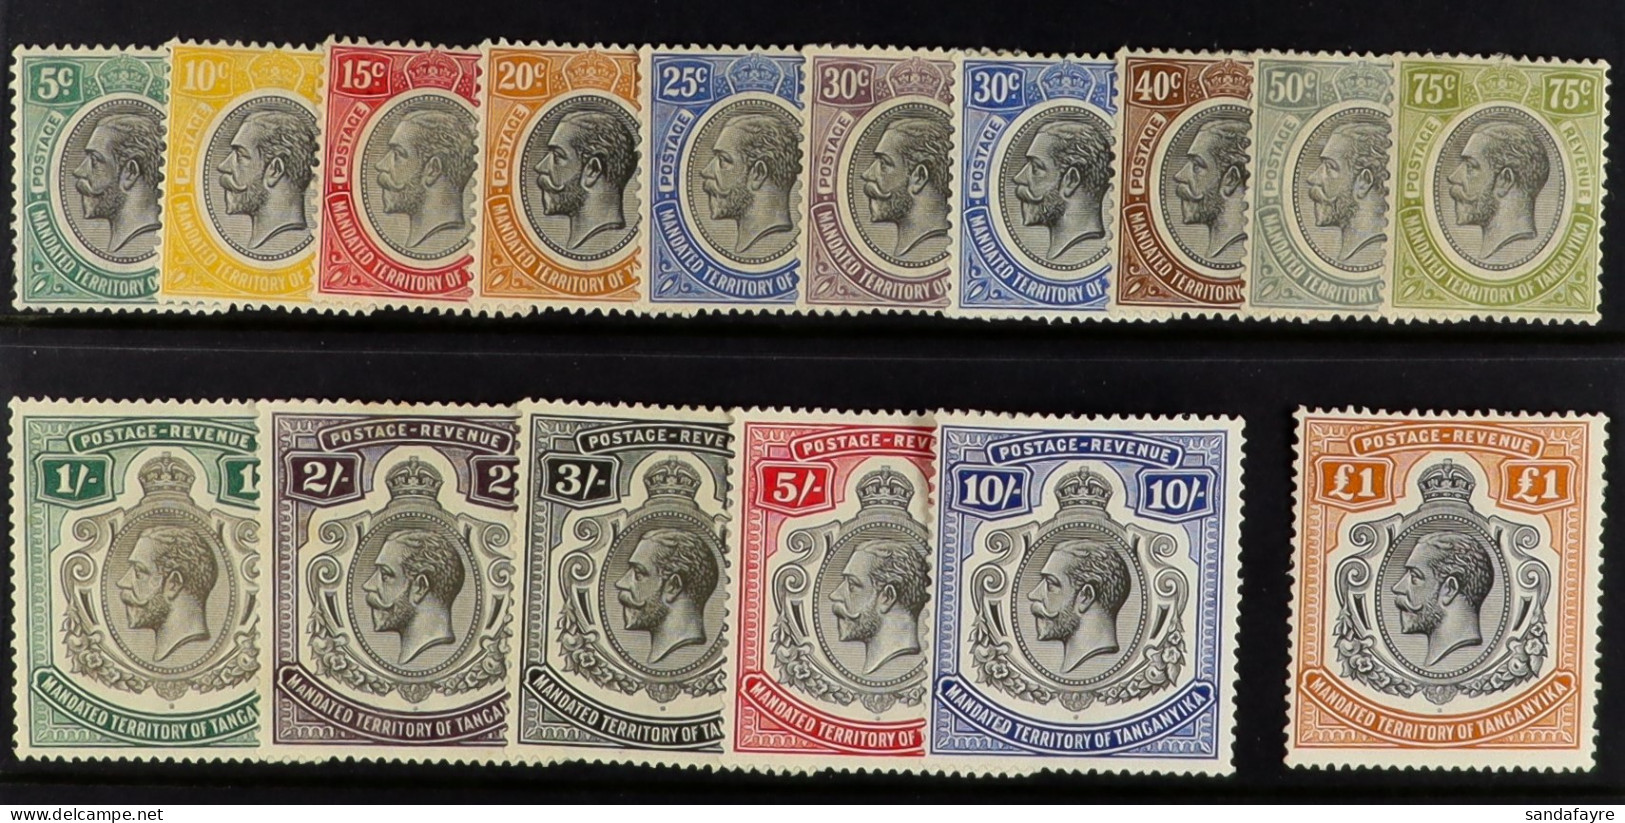 1927-31 Set, SG 93/107, Mint - The ?1 Value Never Hinged. Cat. ?500 (16 Stamps) - Tanganyika (...-1932)